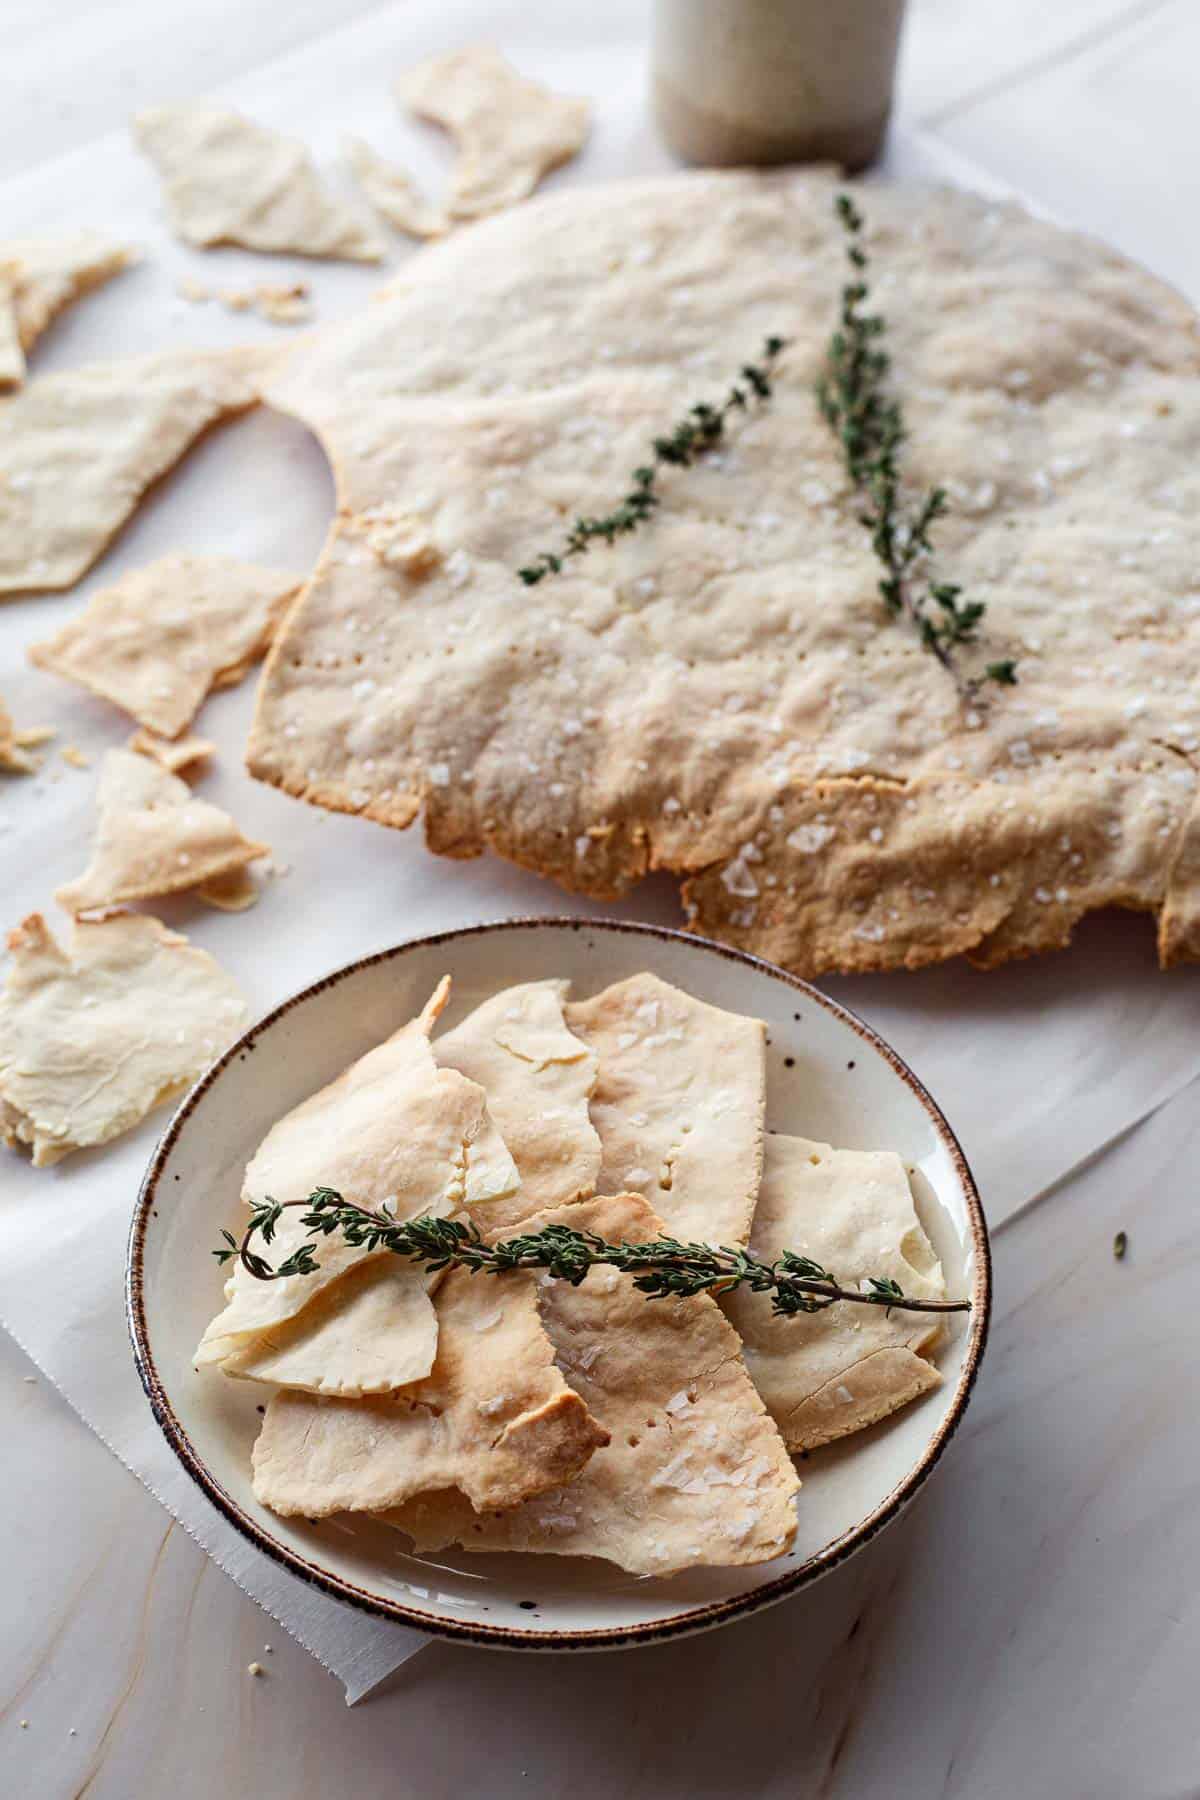 A plate of freshly baked gluten-free matzo with thyme, surrounded by scattered pieces and a rolling pin, on a wooden table.